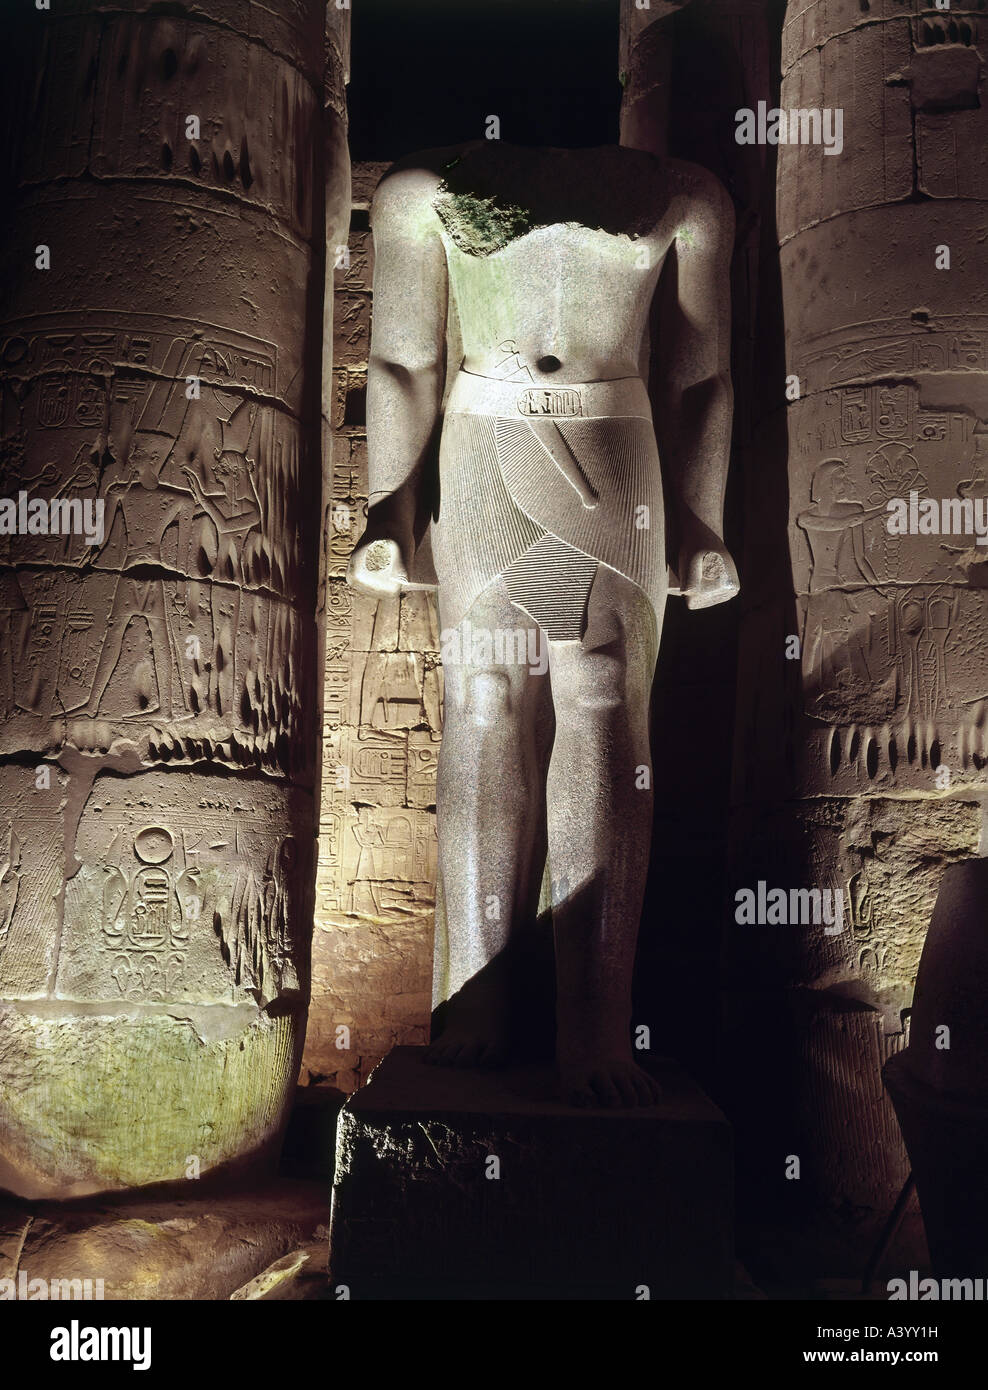 travel /geography, Egypt, Luxor, buildings, temple, Theban divine family Amun, Mut, Chons, exterior view, night, temple of Ramesses II, southern part, statue of pharaoh Amenhotep III, architect Amenhotep son of Hapu, 1402 - 1364 B.C., extensions under Ramesses II, 1303 - 1236 B.C., historic, historical, Africa, architecture, temples, ancient world, New Kingdom, 18th / 19th dynasty, 15th - 13th century B.C., column, columns, statues, sculpture, sculptures, ancient world, Stock Photo